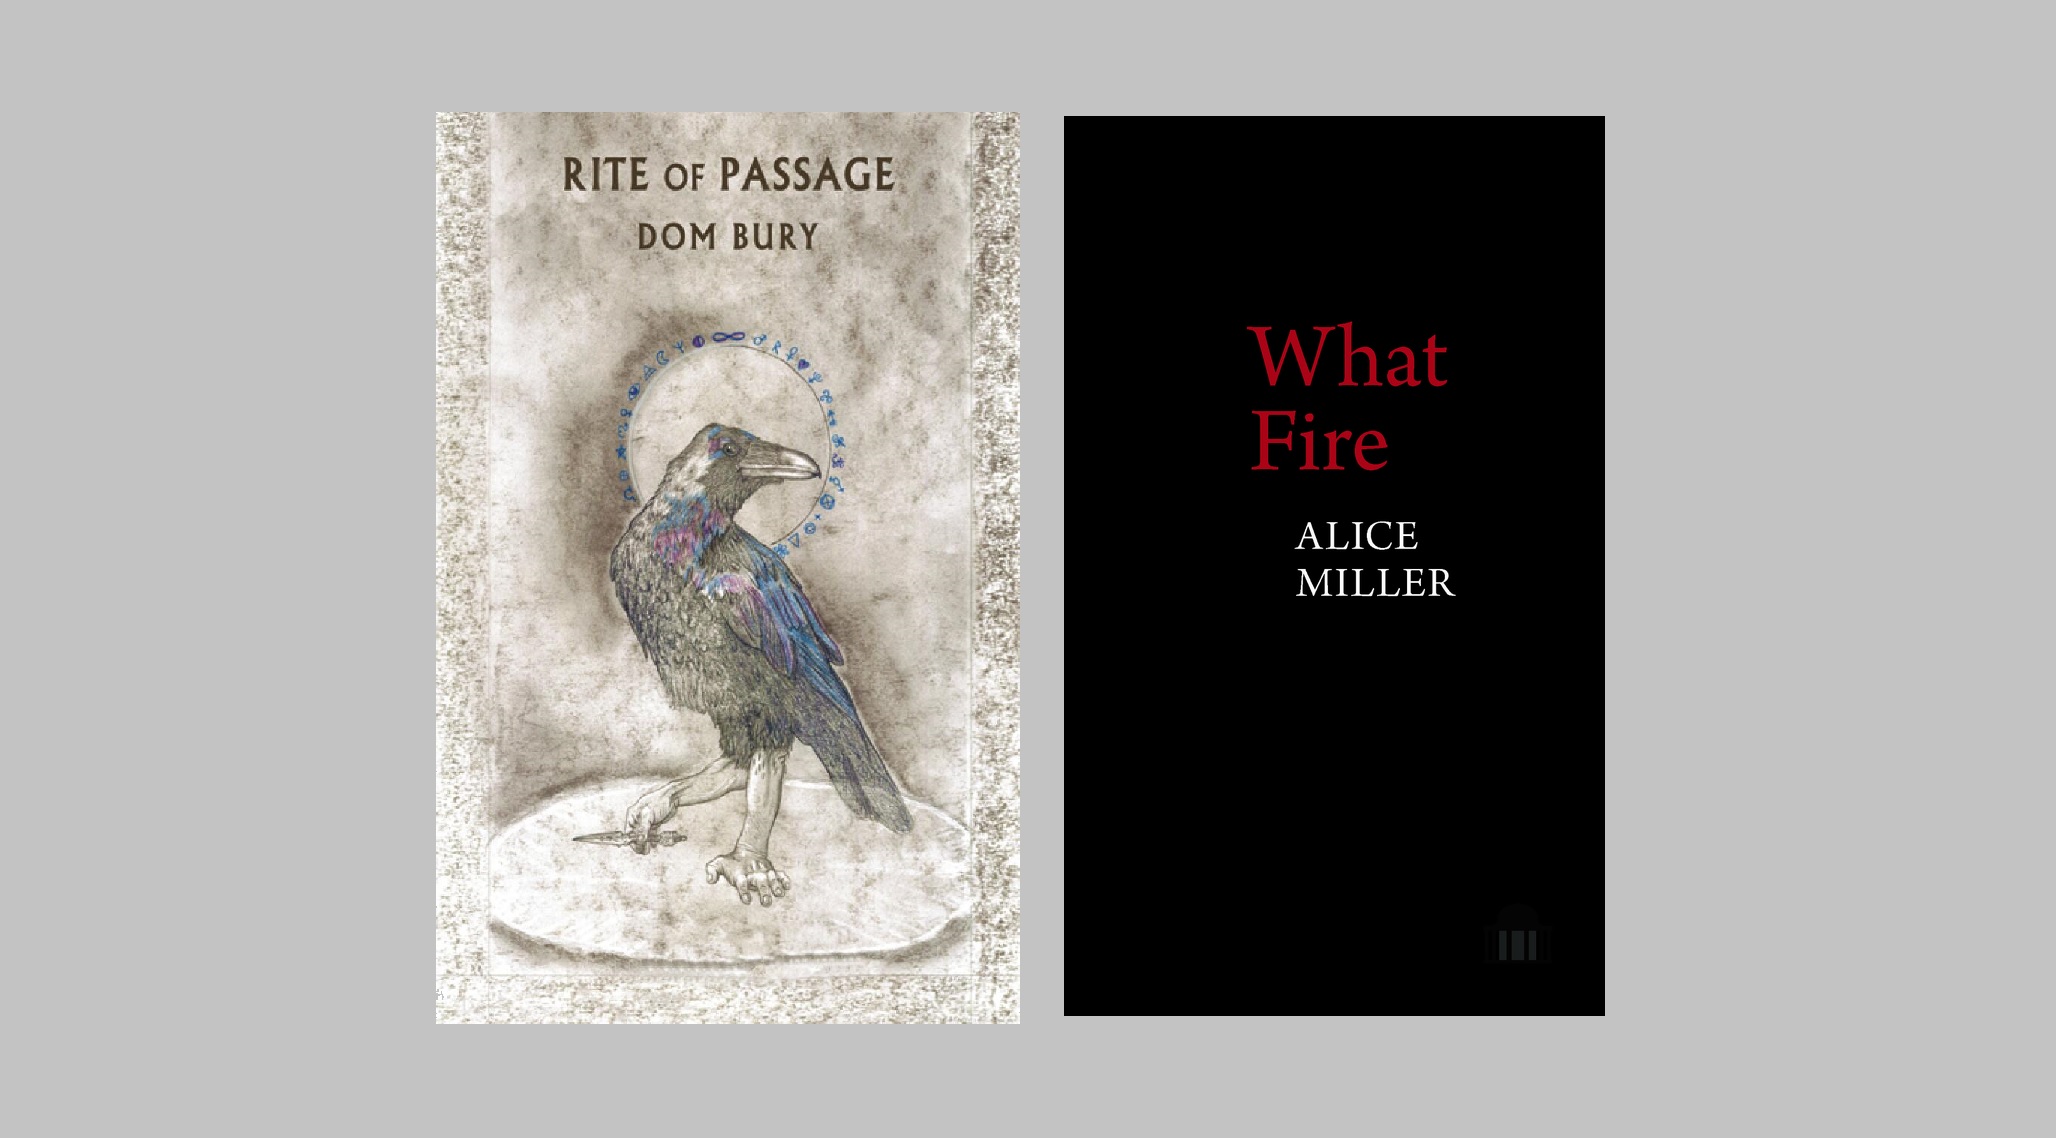 On ‘Rite of Passage’ by Dom Bury & ‘What Fire’ by Alice Miller